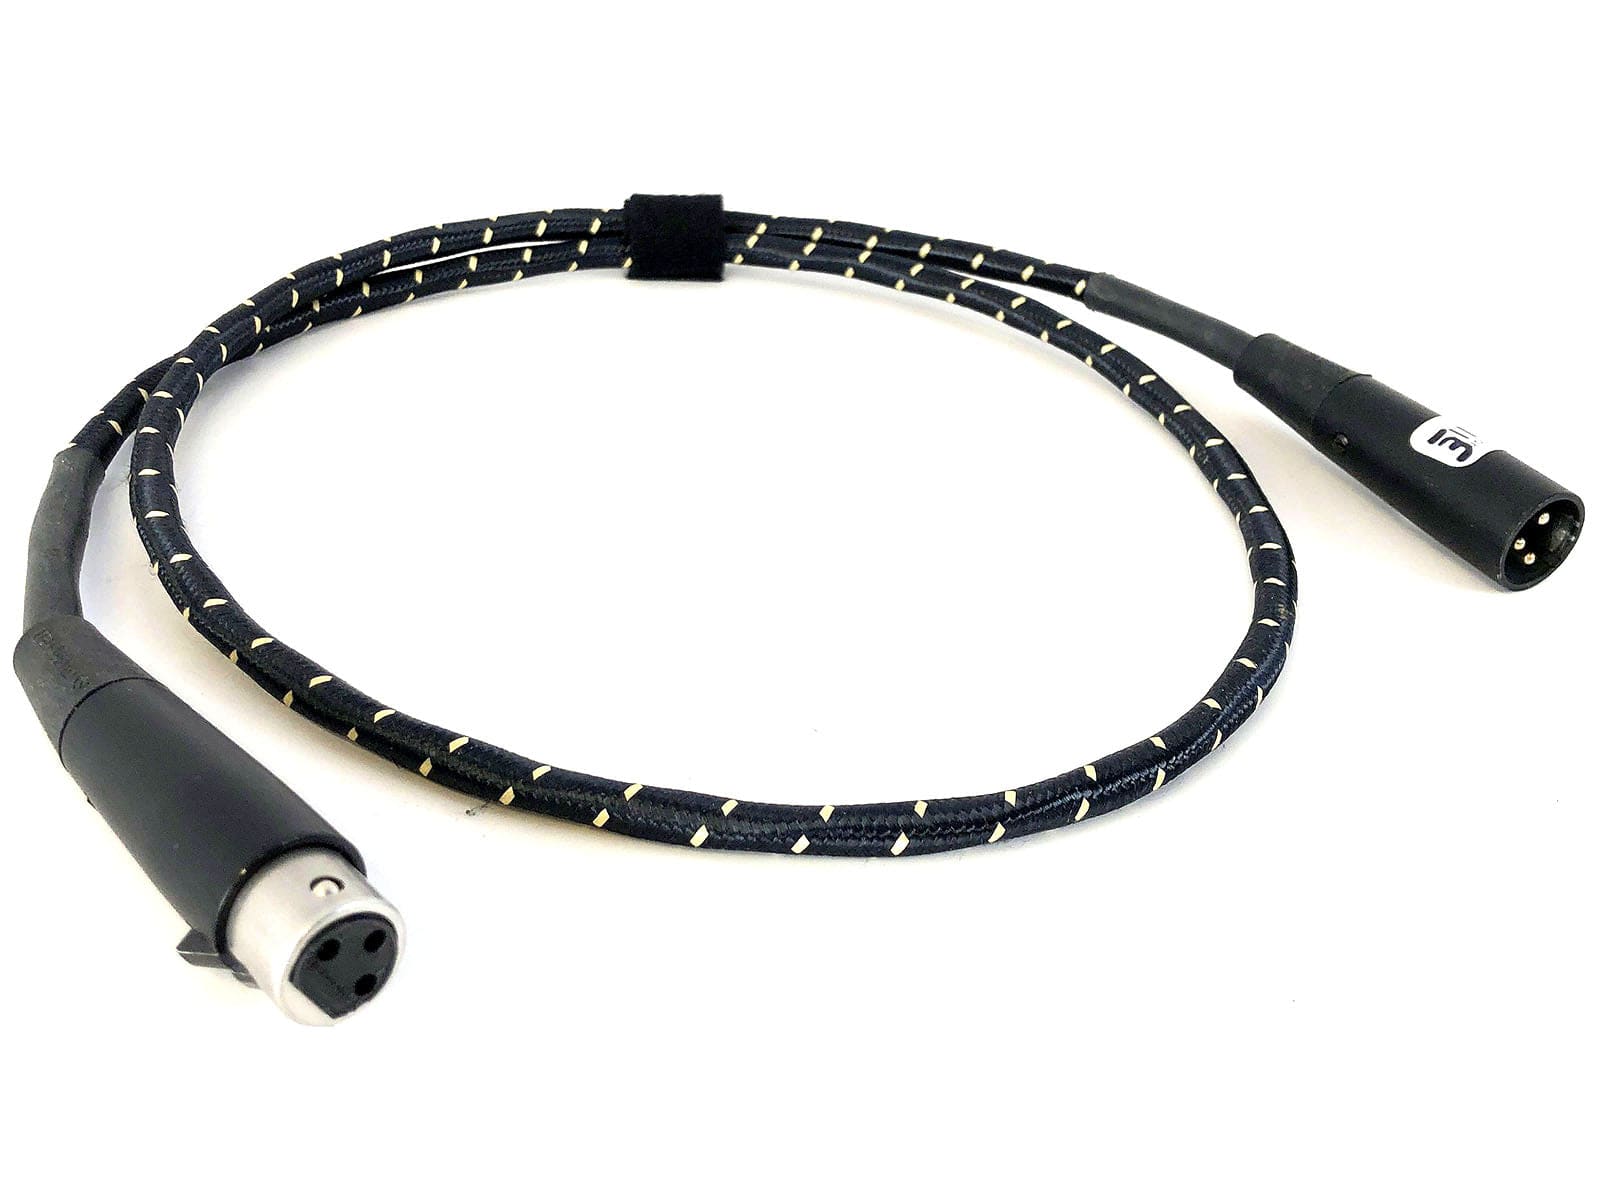 Kimber Kable Illuminations Series - Orchid Reference Digital Cable Aes/Ebu (Xlr) 1M Cables